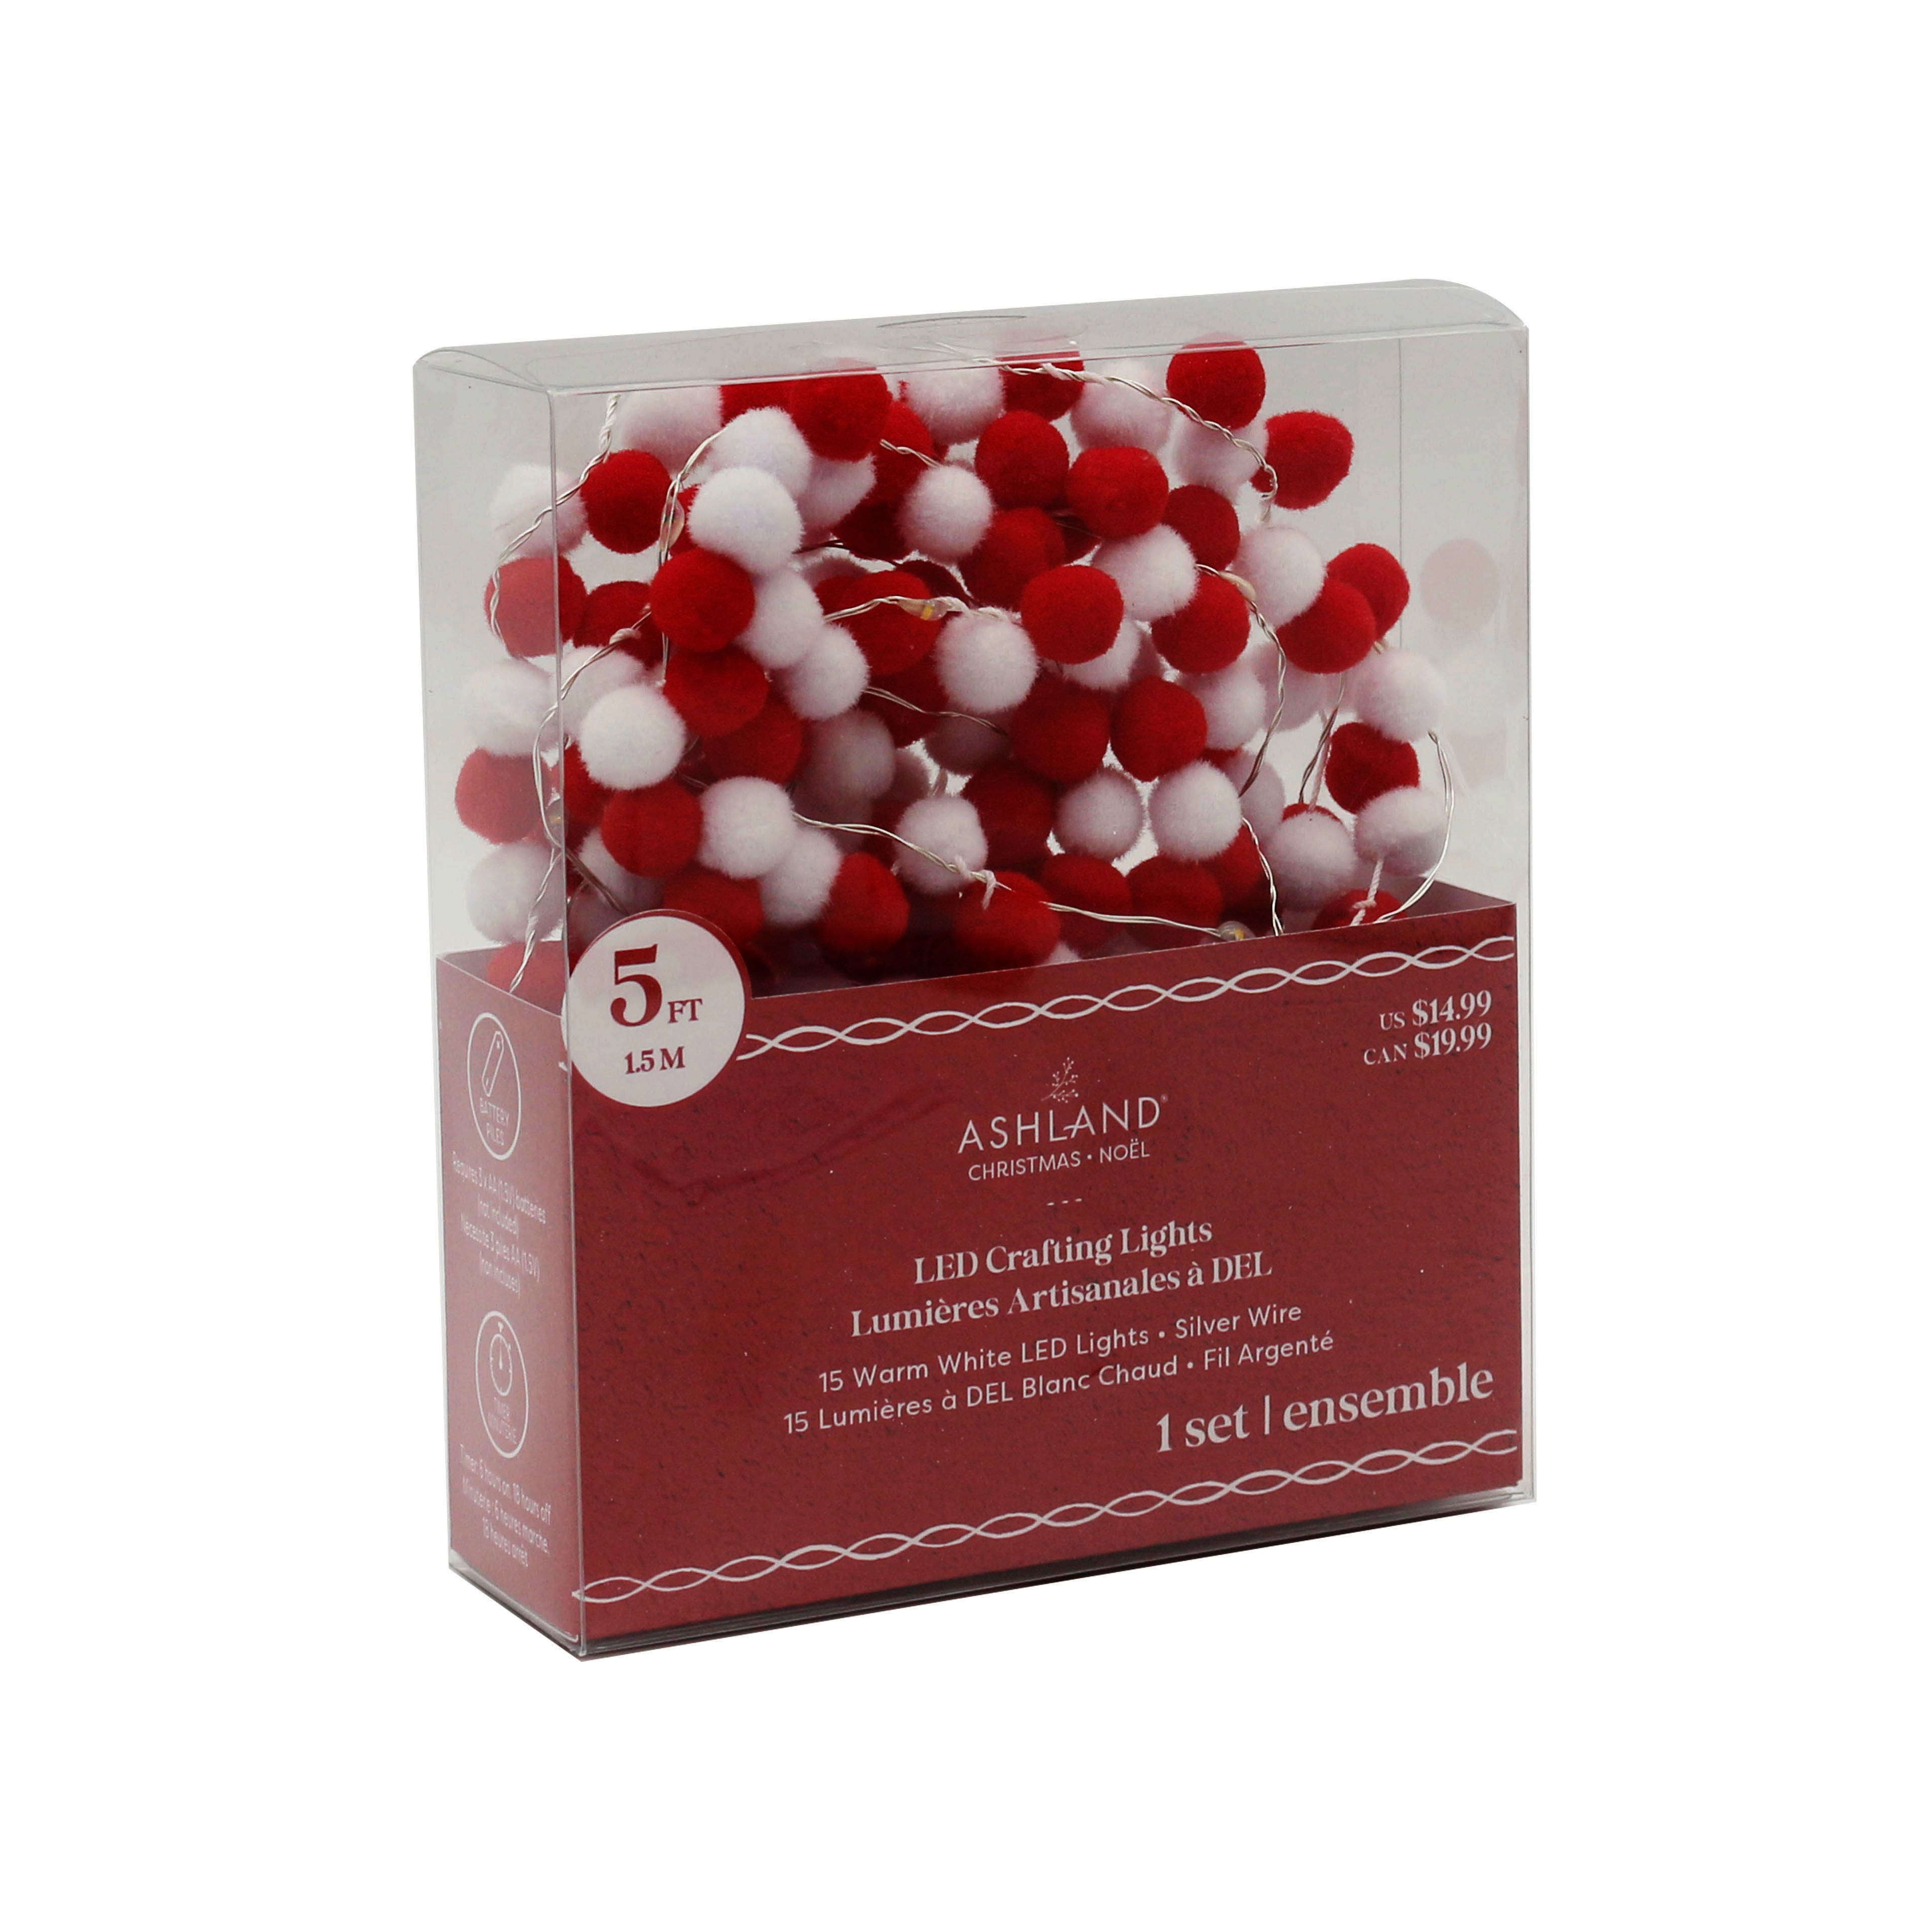 15ct. Warm White LED Crafting Lights with Mini Red Pom Poms by Ashland®